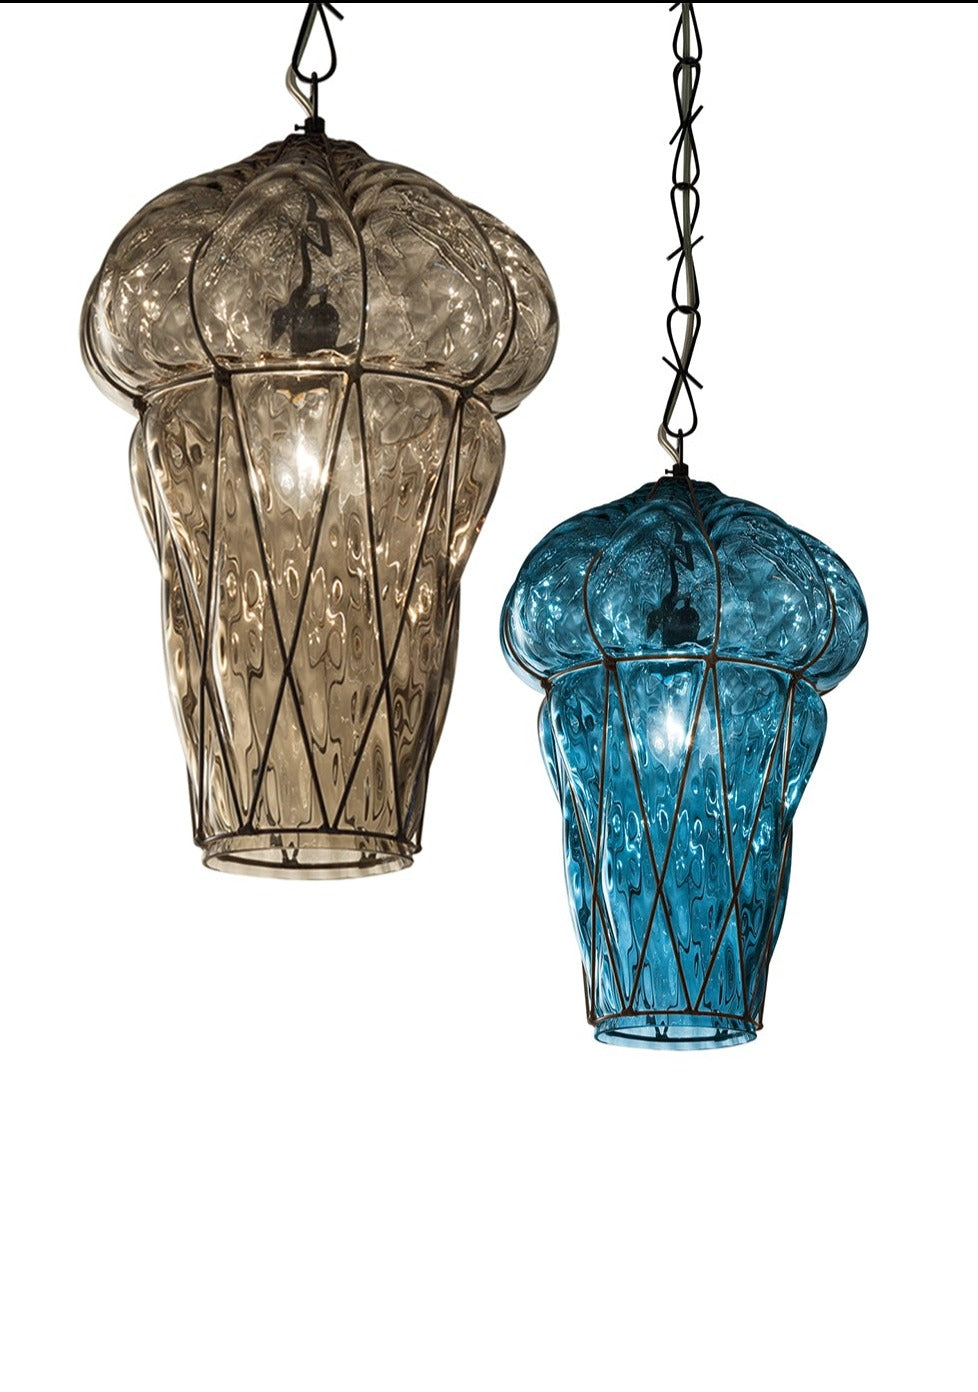 Hand-Blown Timeless Pendant Ceiling Lamp with one diffuser and Murano Glass